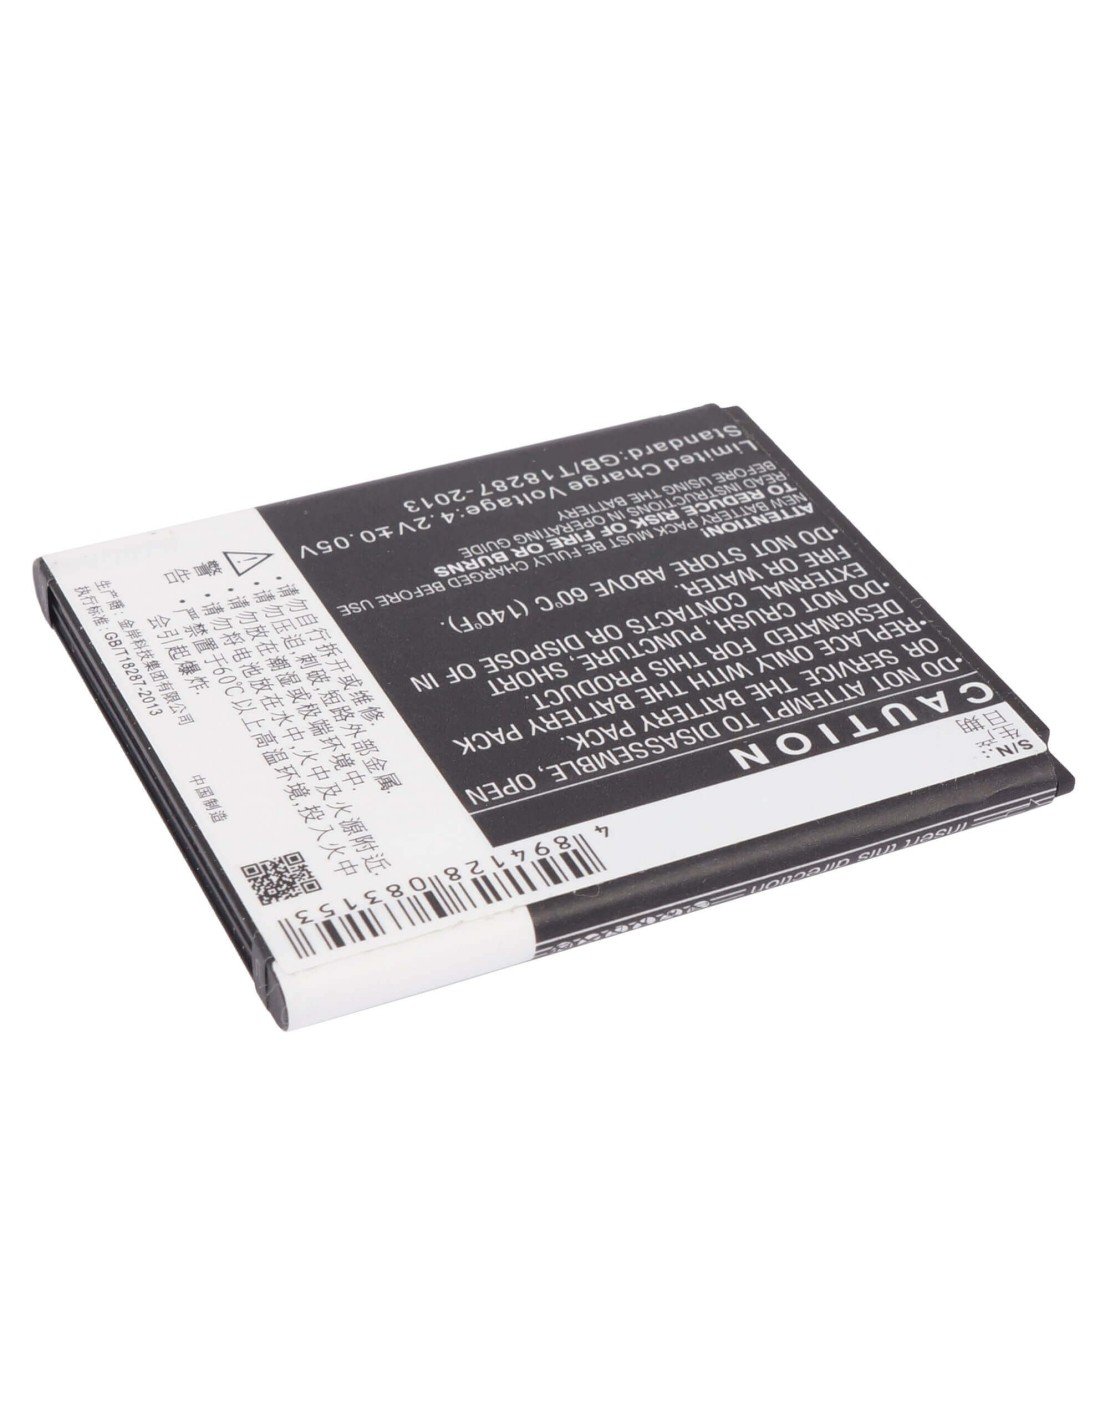 Battery for Coolpad 5218S, 7236, 5218D 3.7V, 1500mAh - 5.55Wh